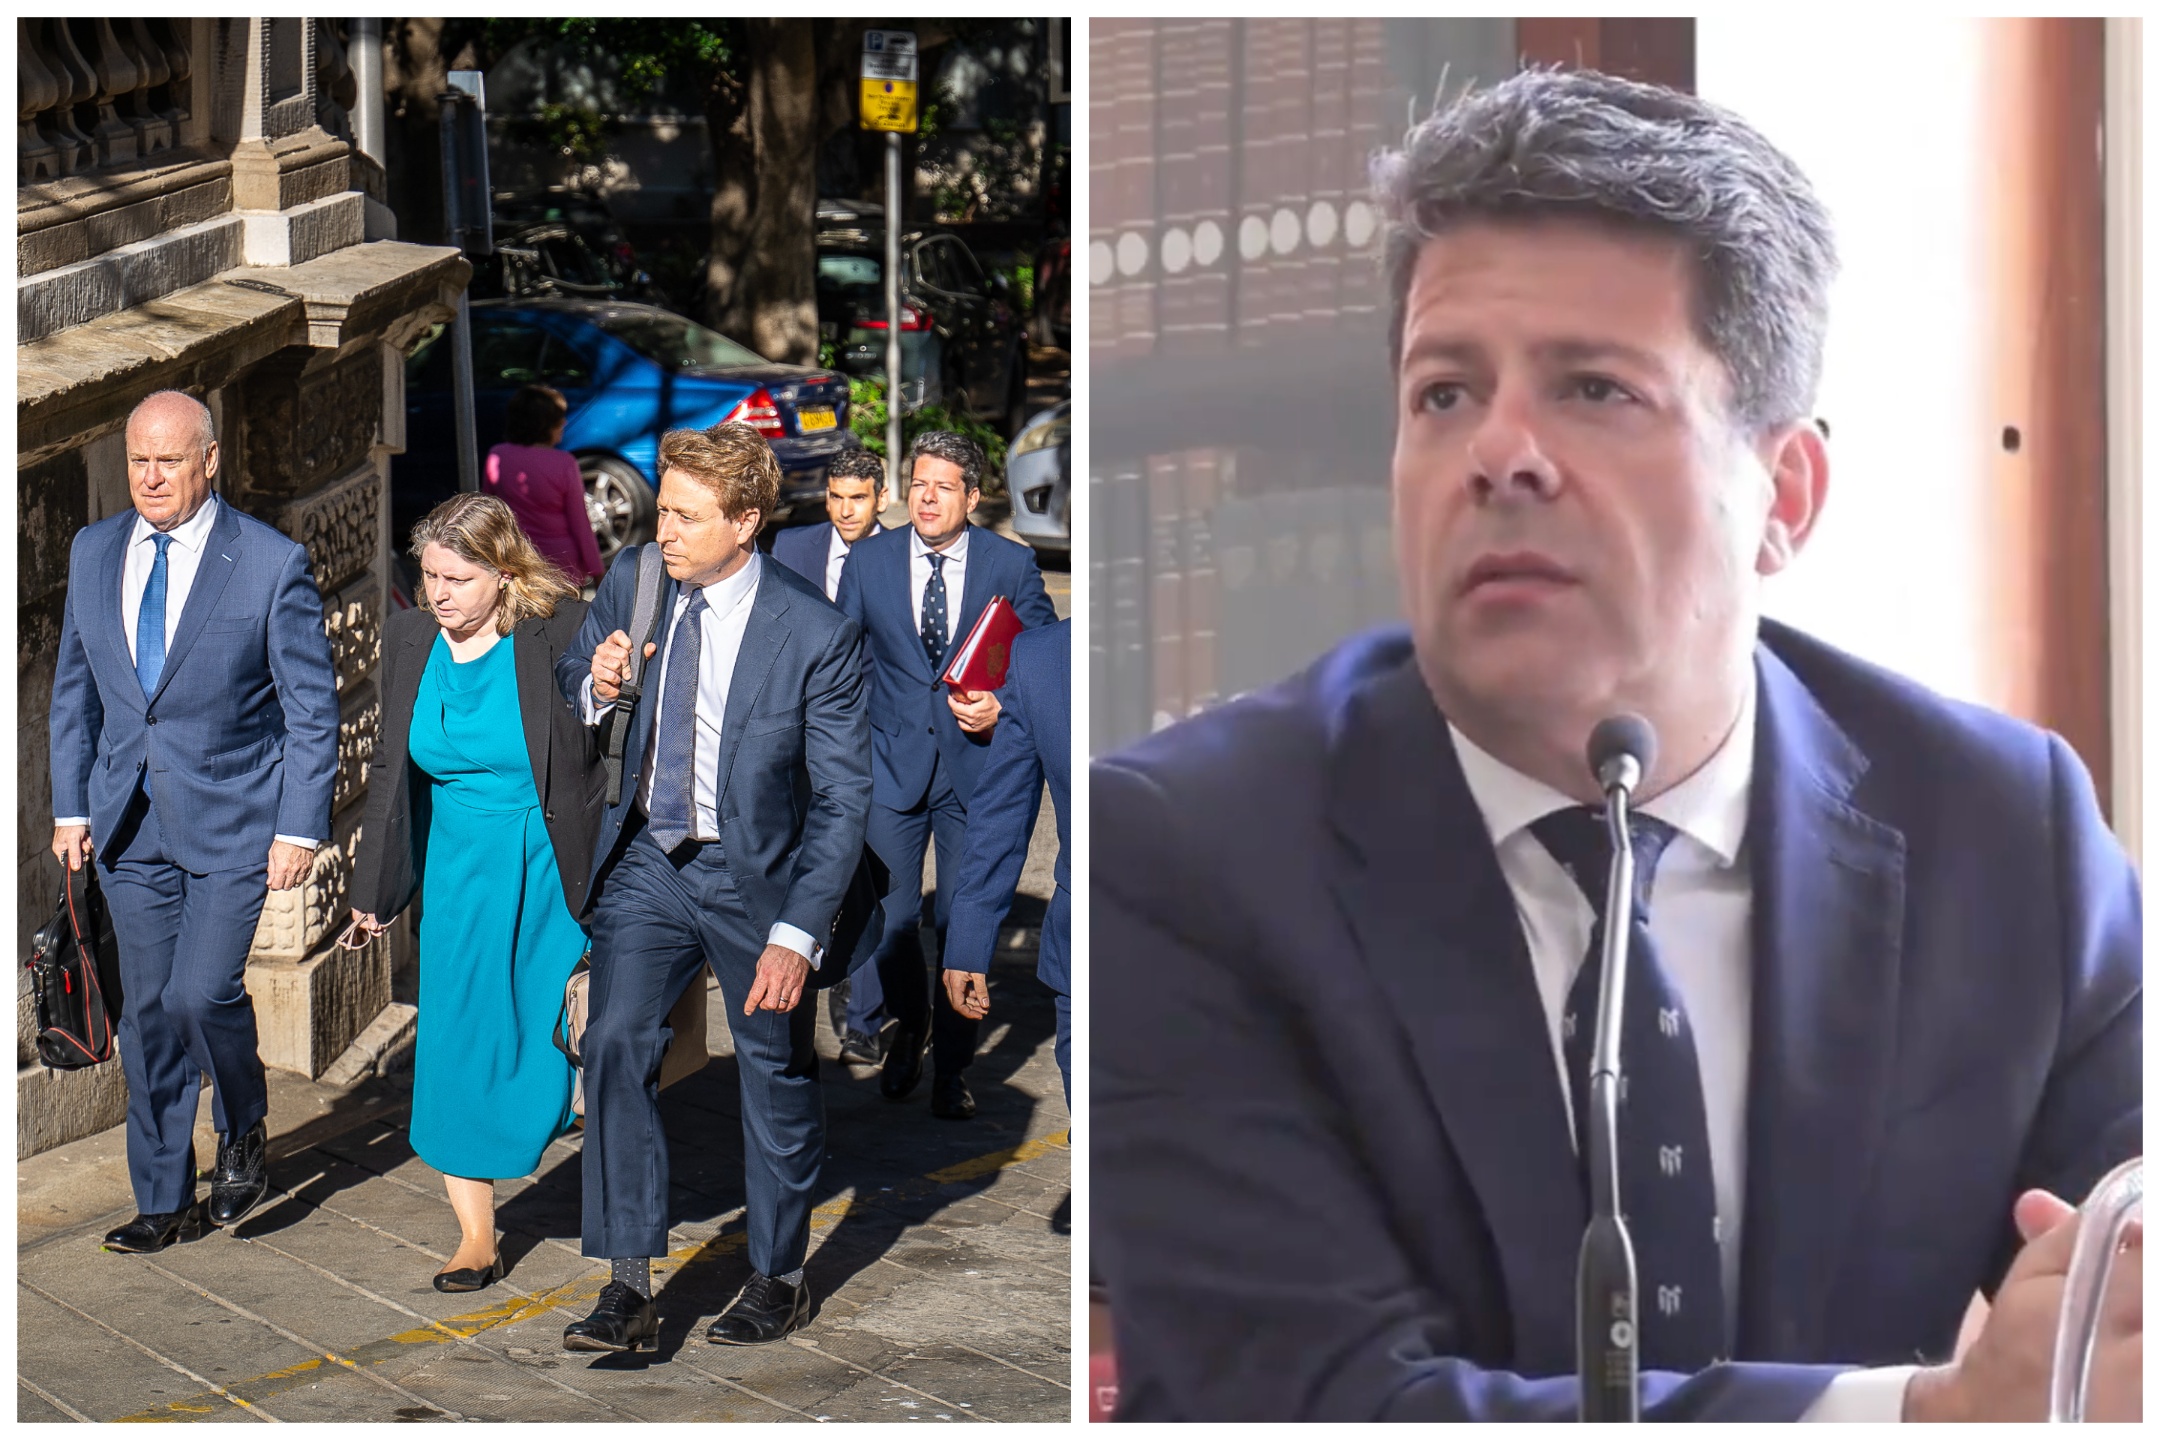 MCGRAIL INQUIRY: Fabian Picardo flexes his lawyer muscles in final showdown at the McGrail Inquiry but admits he shared sensitive information with a suspect and boasts he is ‘wealthier than I ever wanted’